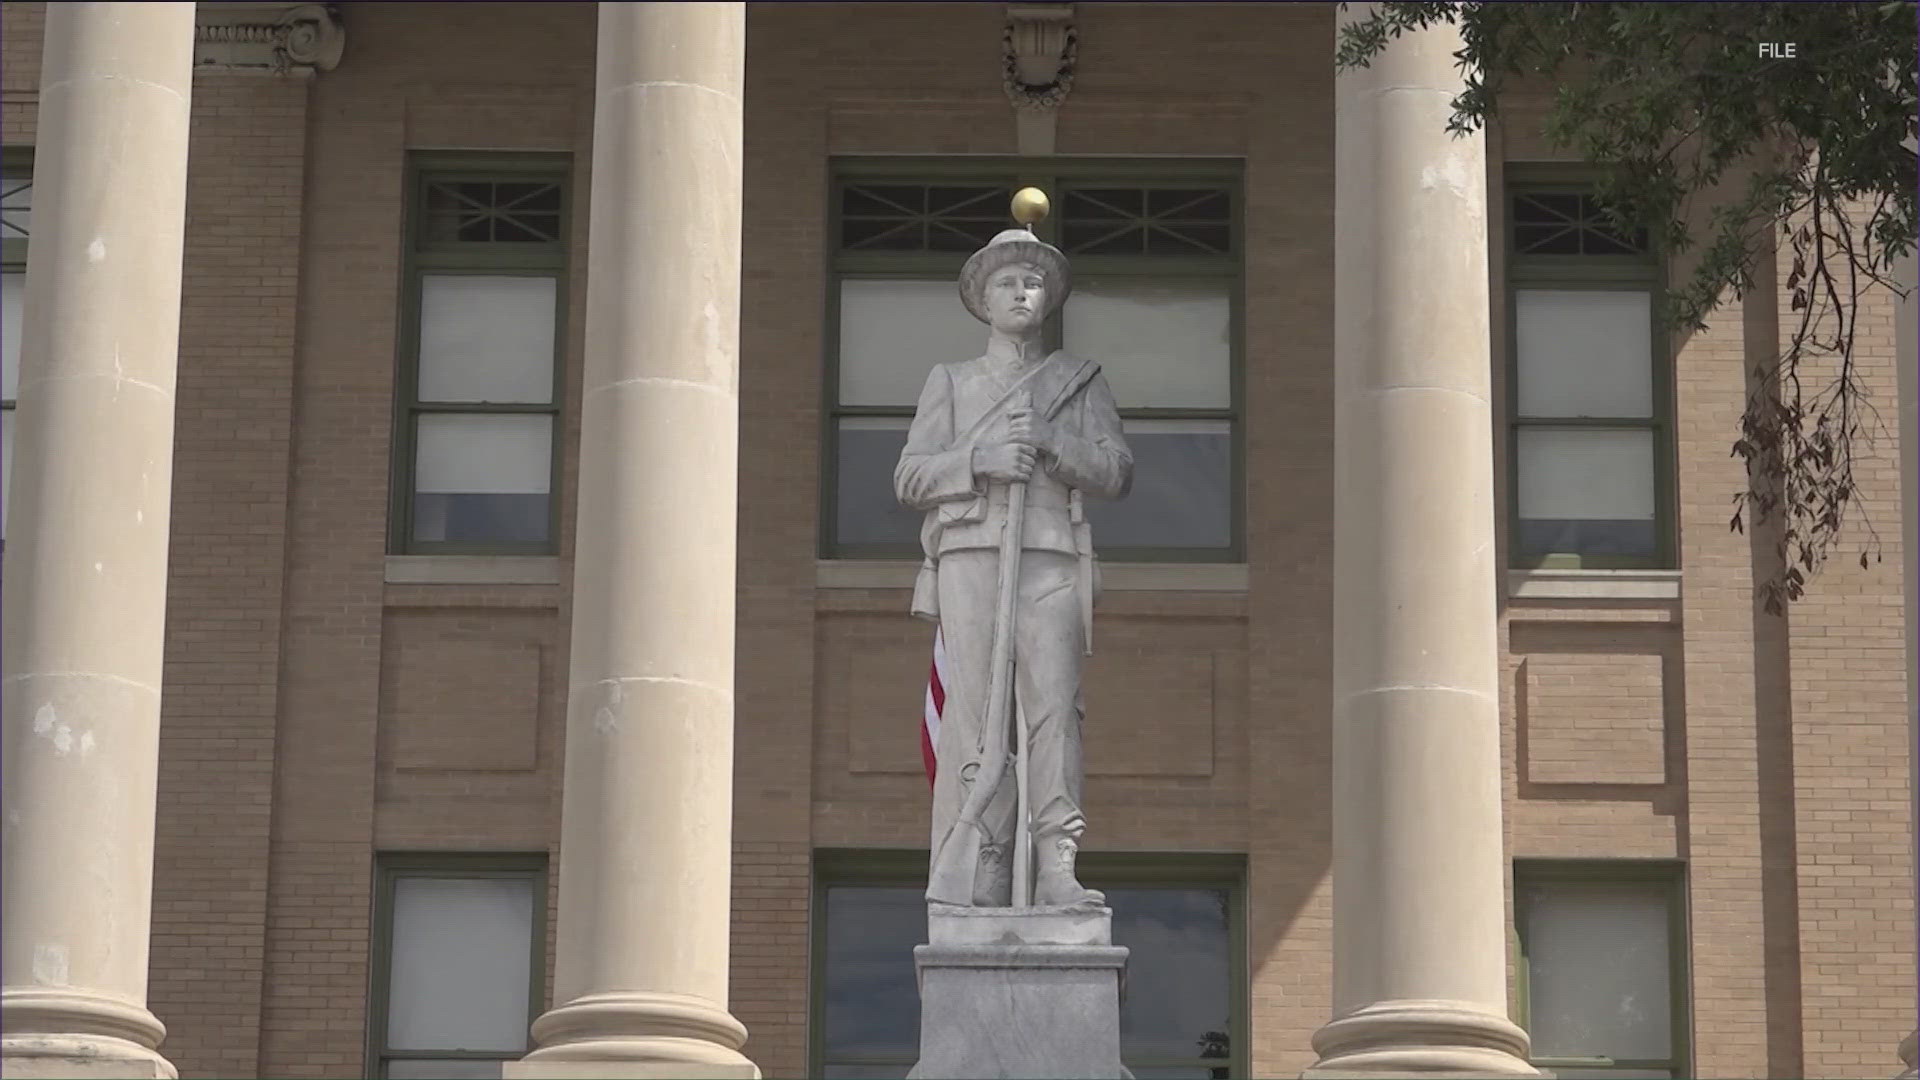 The monument has been outside the Williamson County courthouse since 1916.